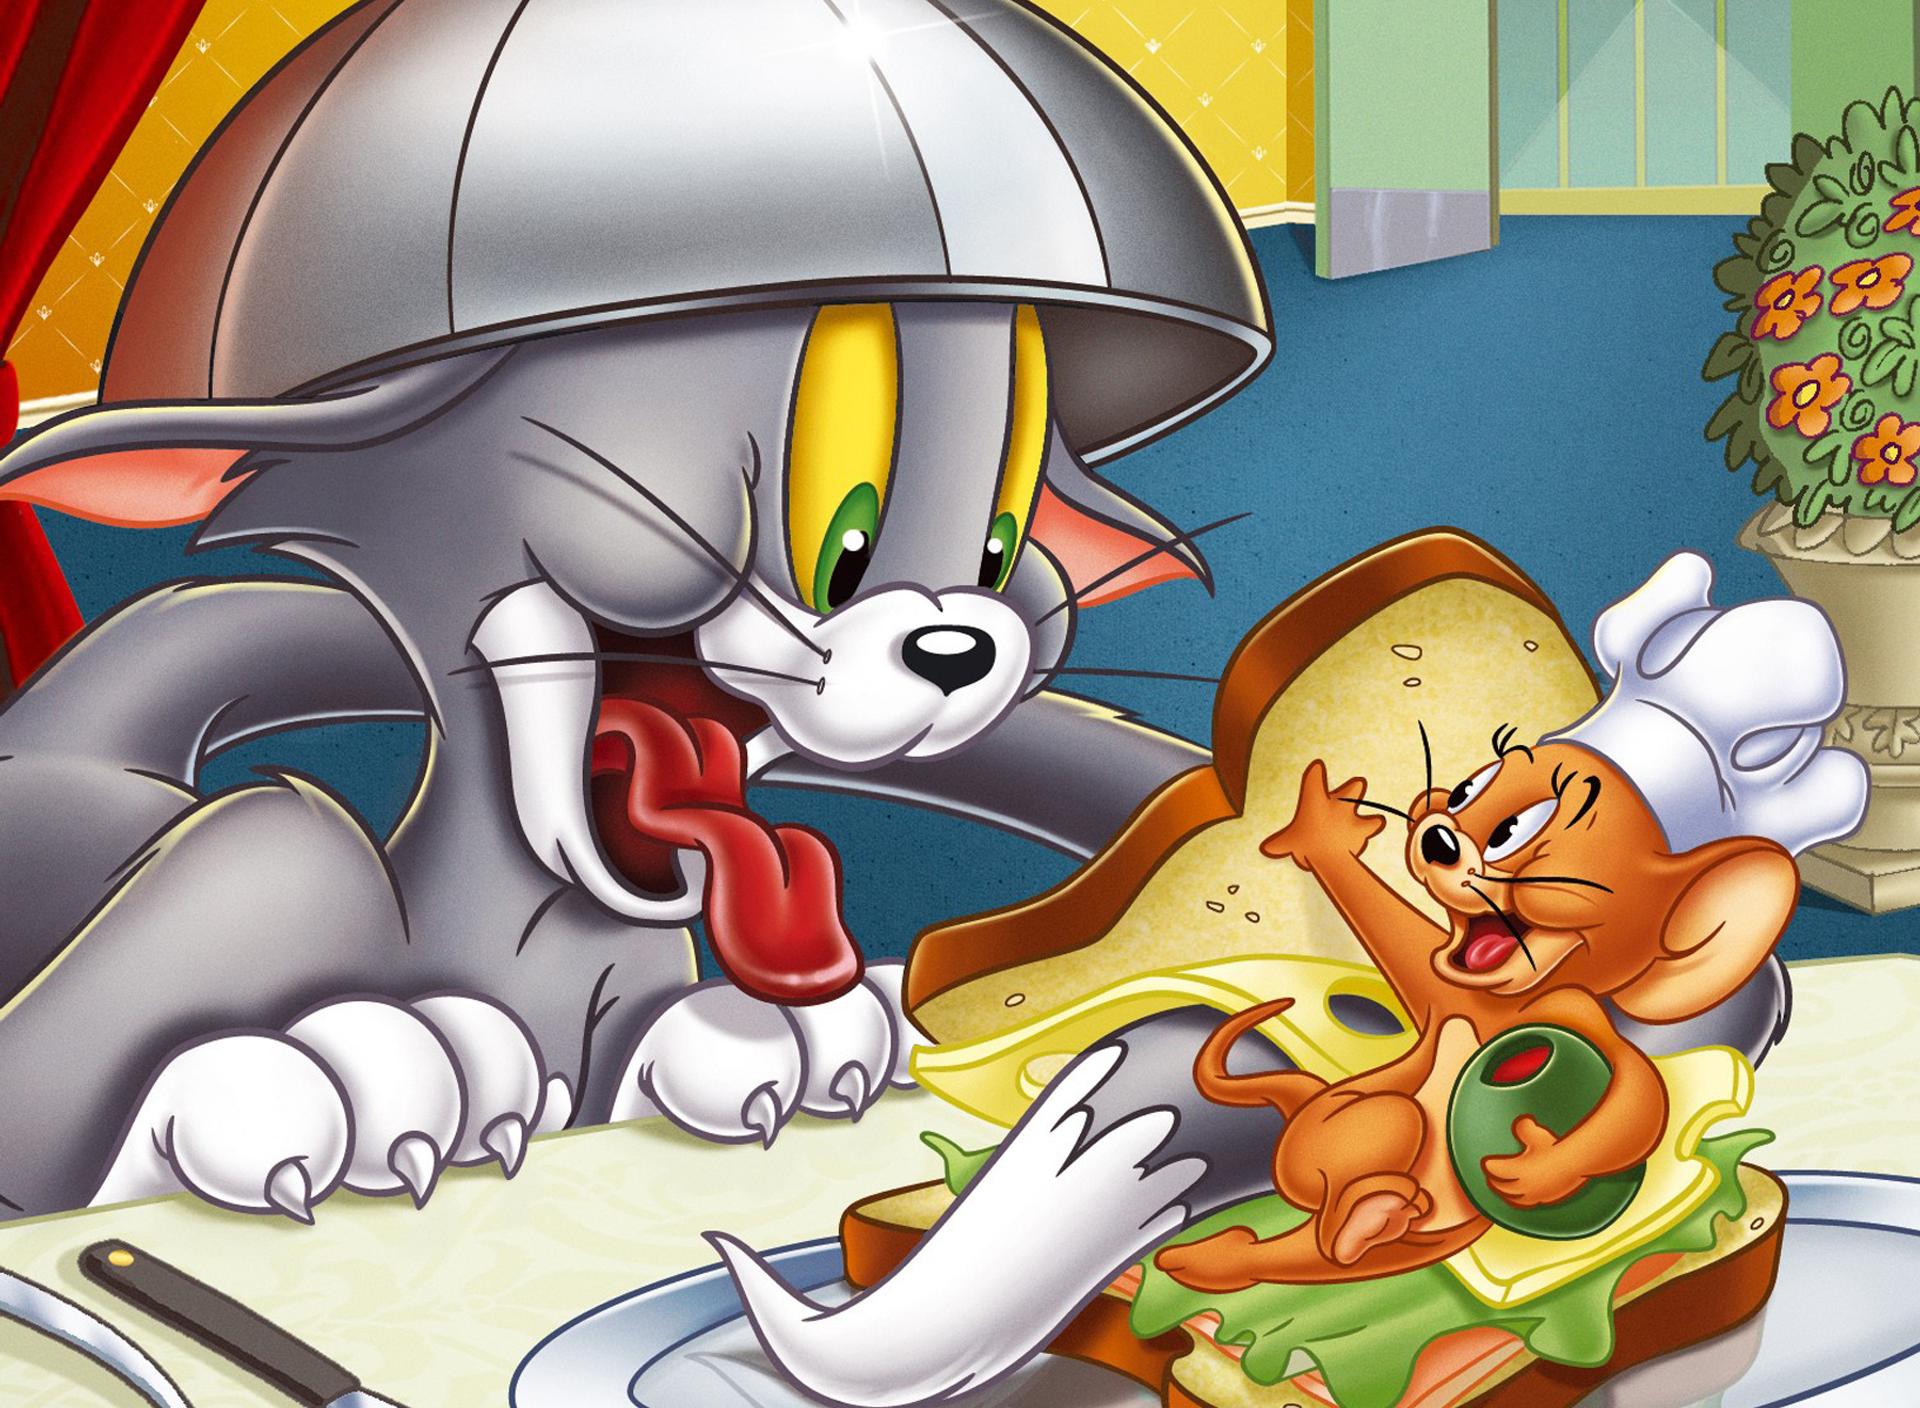 Tom and Jerry in the kitchen make a sandwich